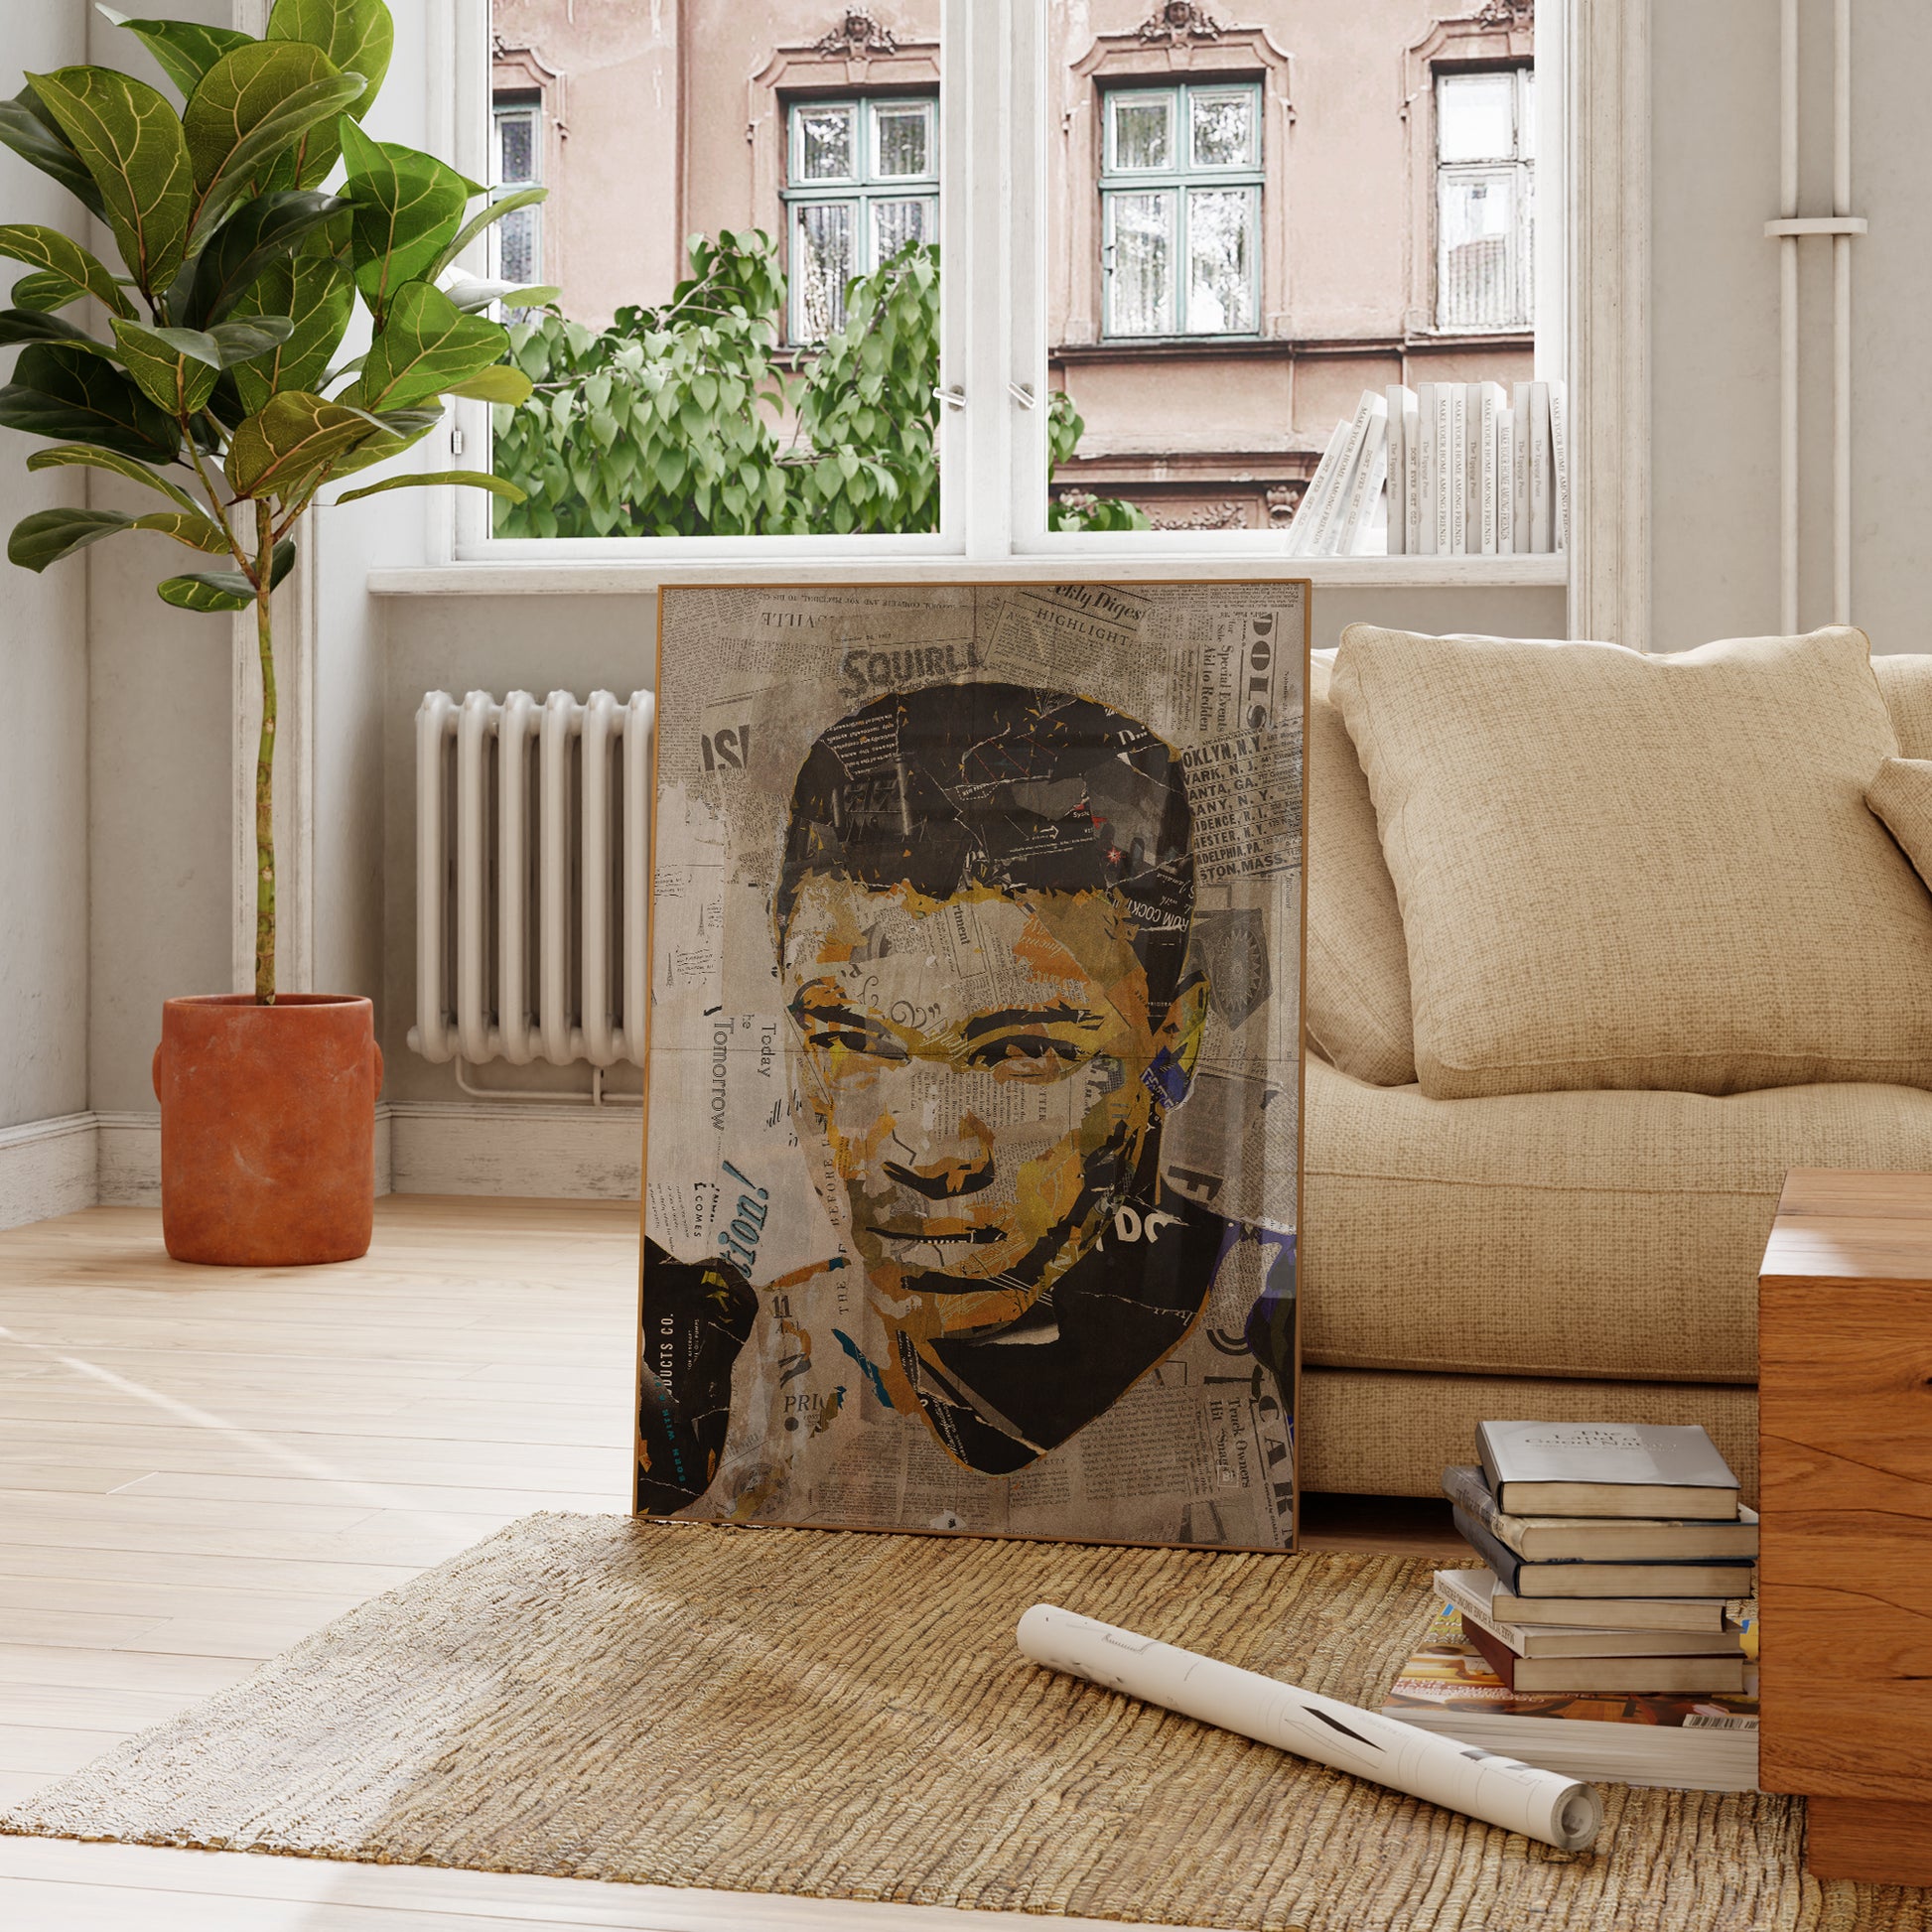 Be inspired by our iconic collage portrait art print of Muhammad Ali. This artwork was printed using the giclée process on archival acid-free paper and is presented in a French living room, capturing its timeless beauty in every detail.